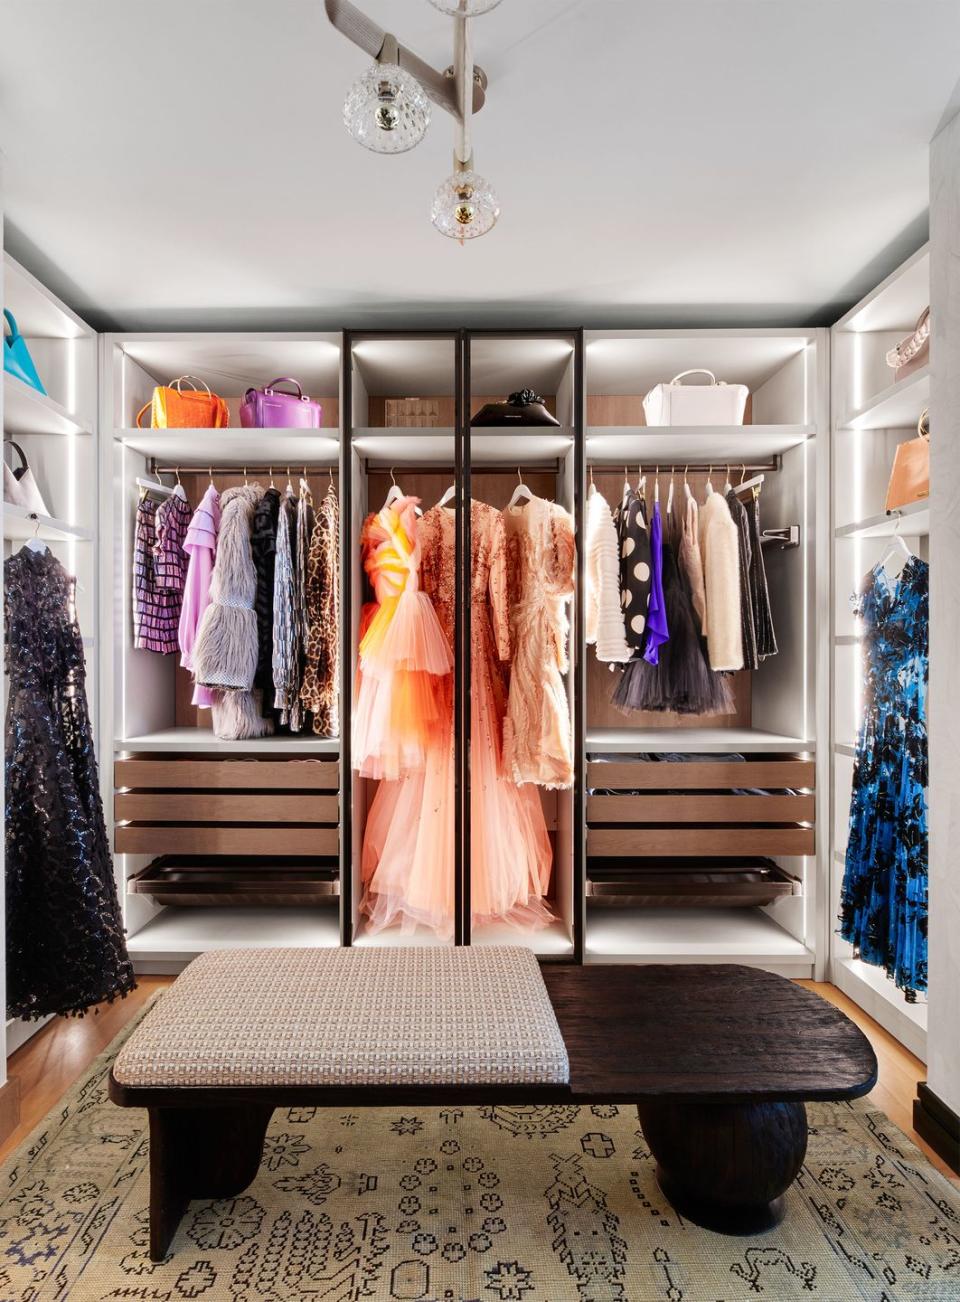 in the center of a walk in closet is a dark wood bench and a patterned rug, along the walls are sections with hanging clothing, drawers below, shelves, and storage cubbies with colored handbags above